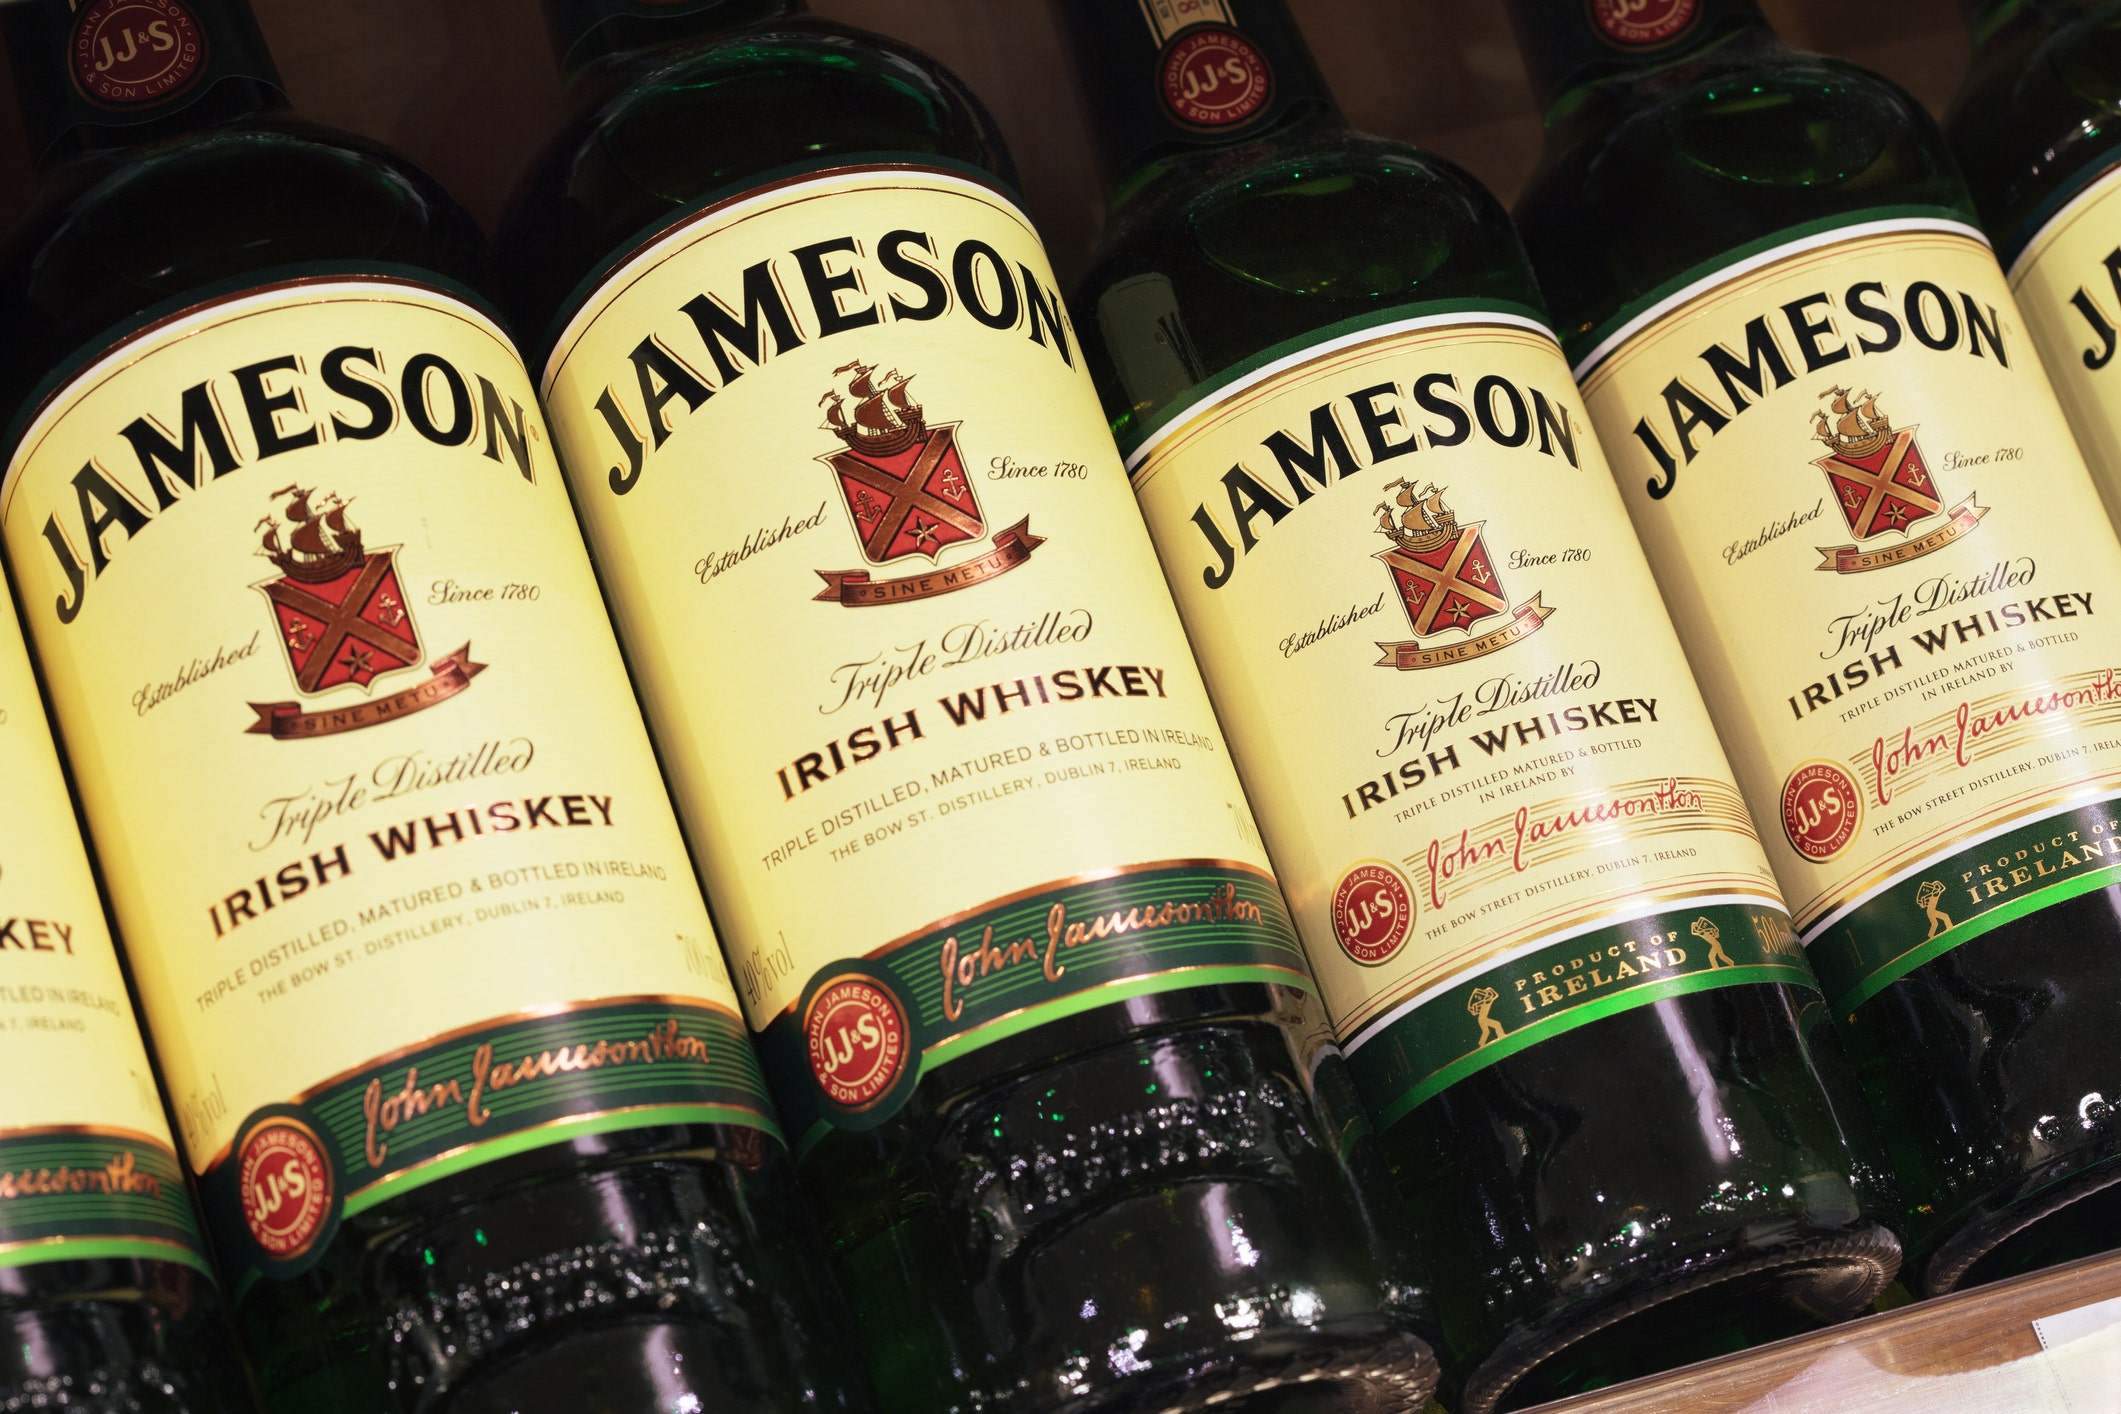 Jameson Whiskey paying fans $50 to take off work on St. Patrick's Day